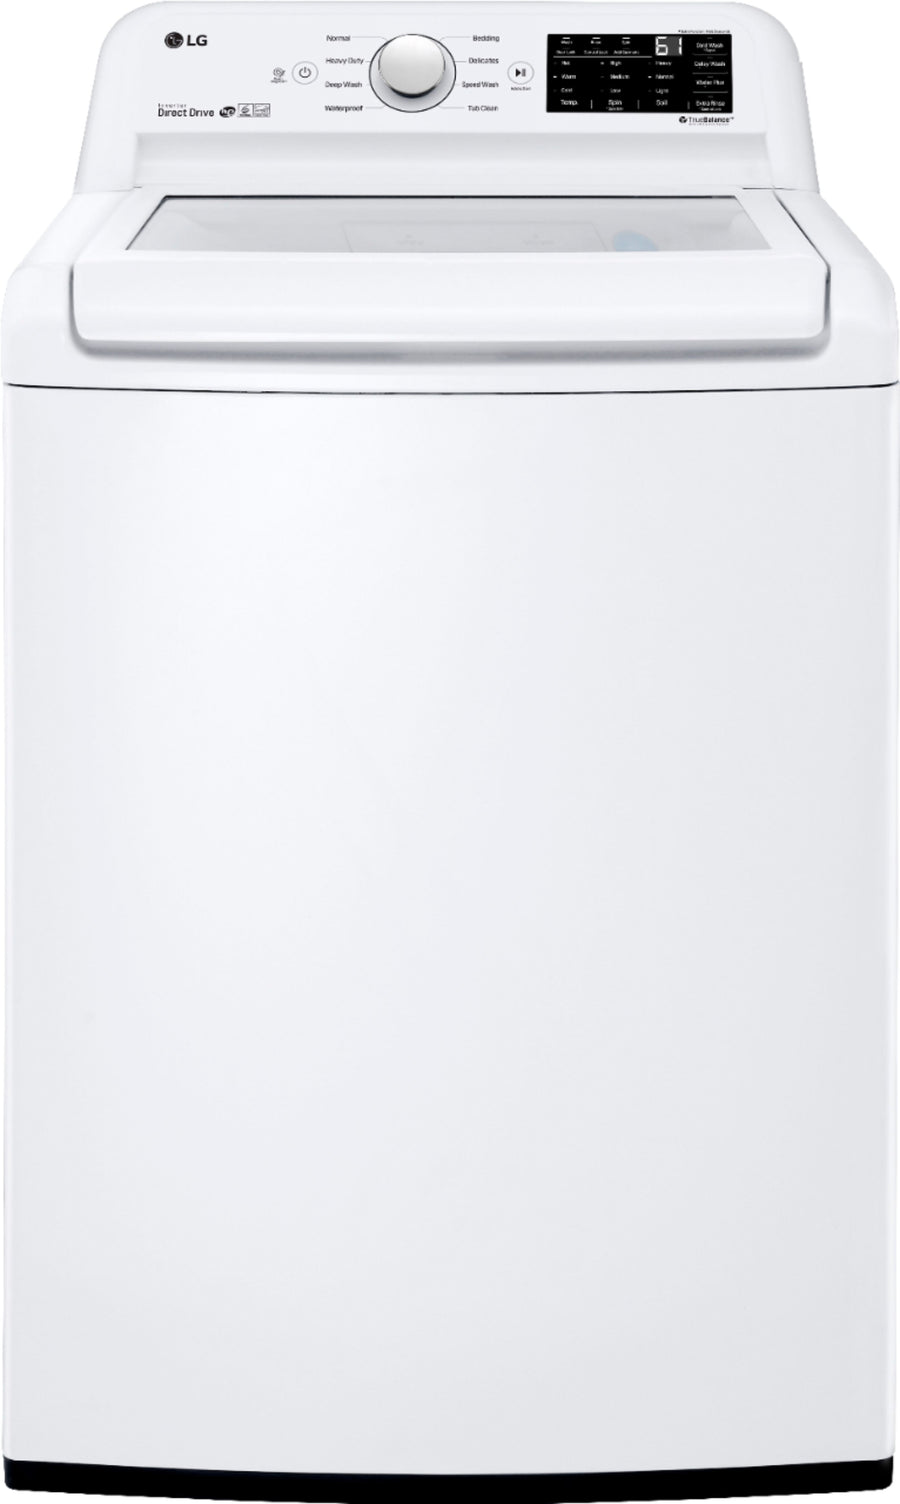 LG - 4.5 Cu. Ft. High-Efficiency Top-Load Washer with TurboDrum Technology - White_0